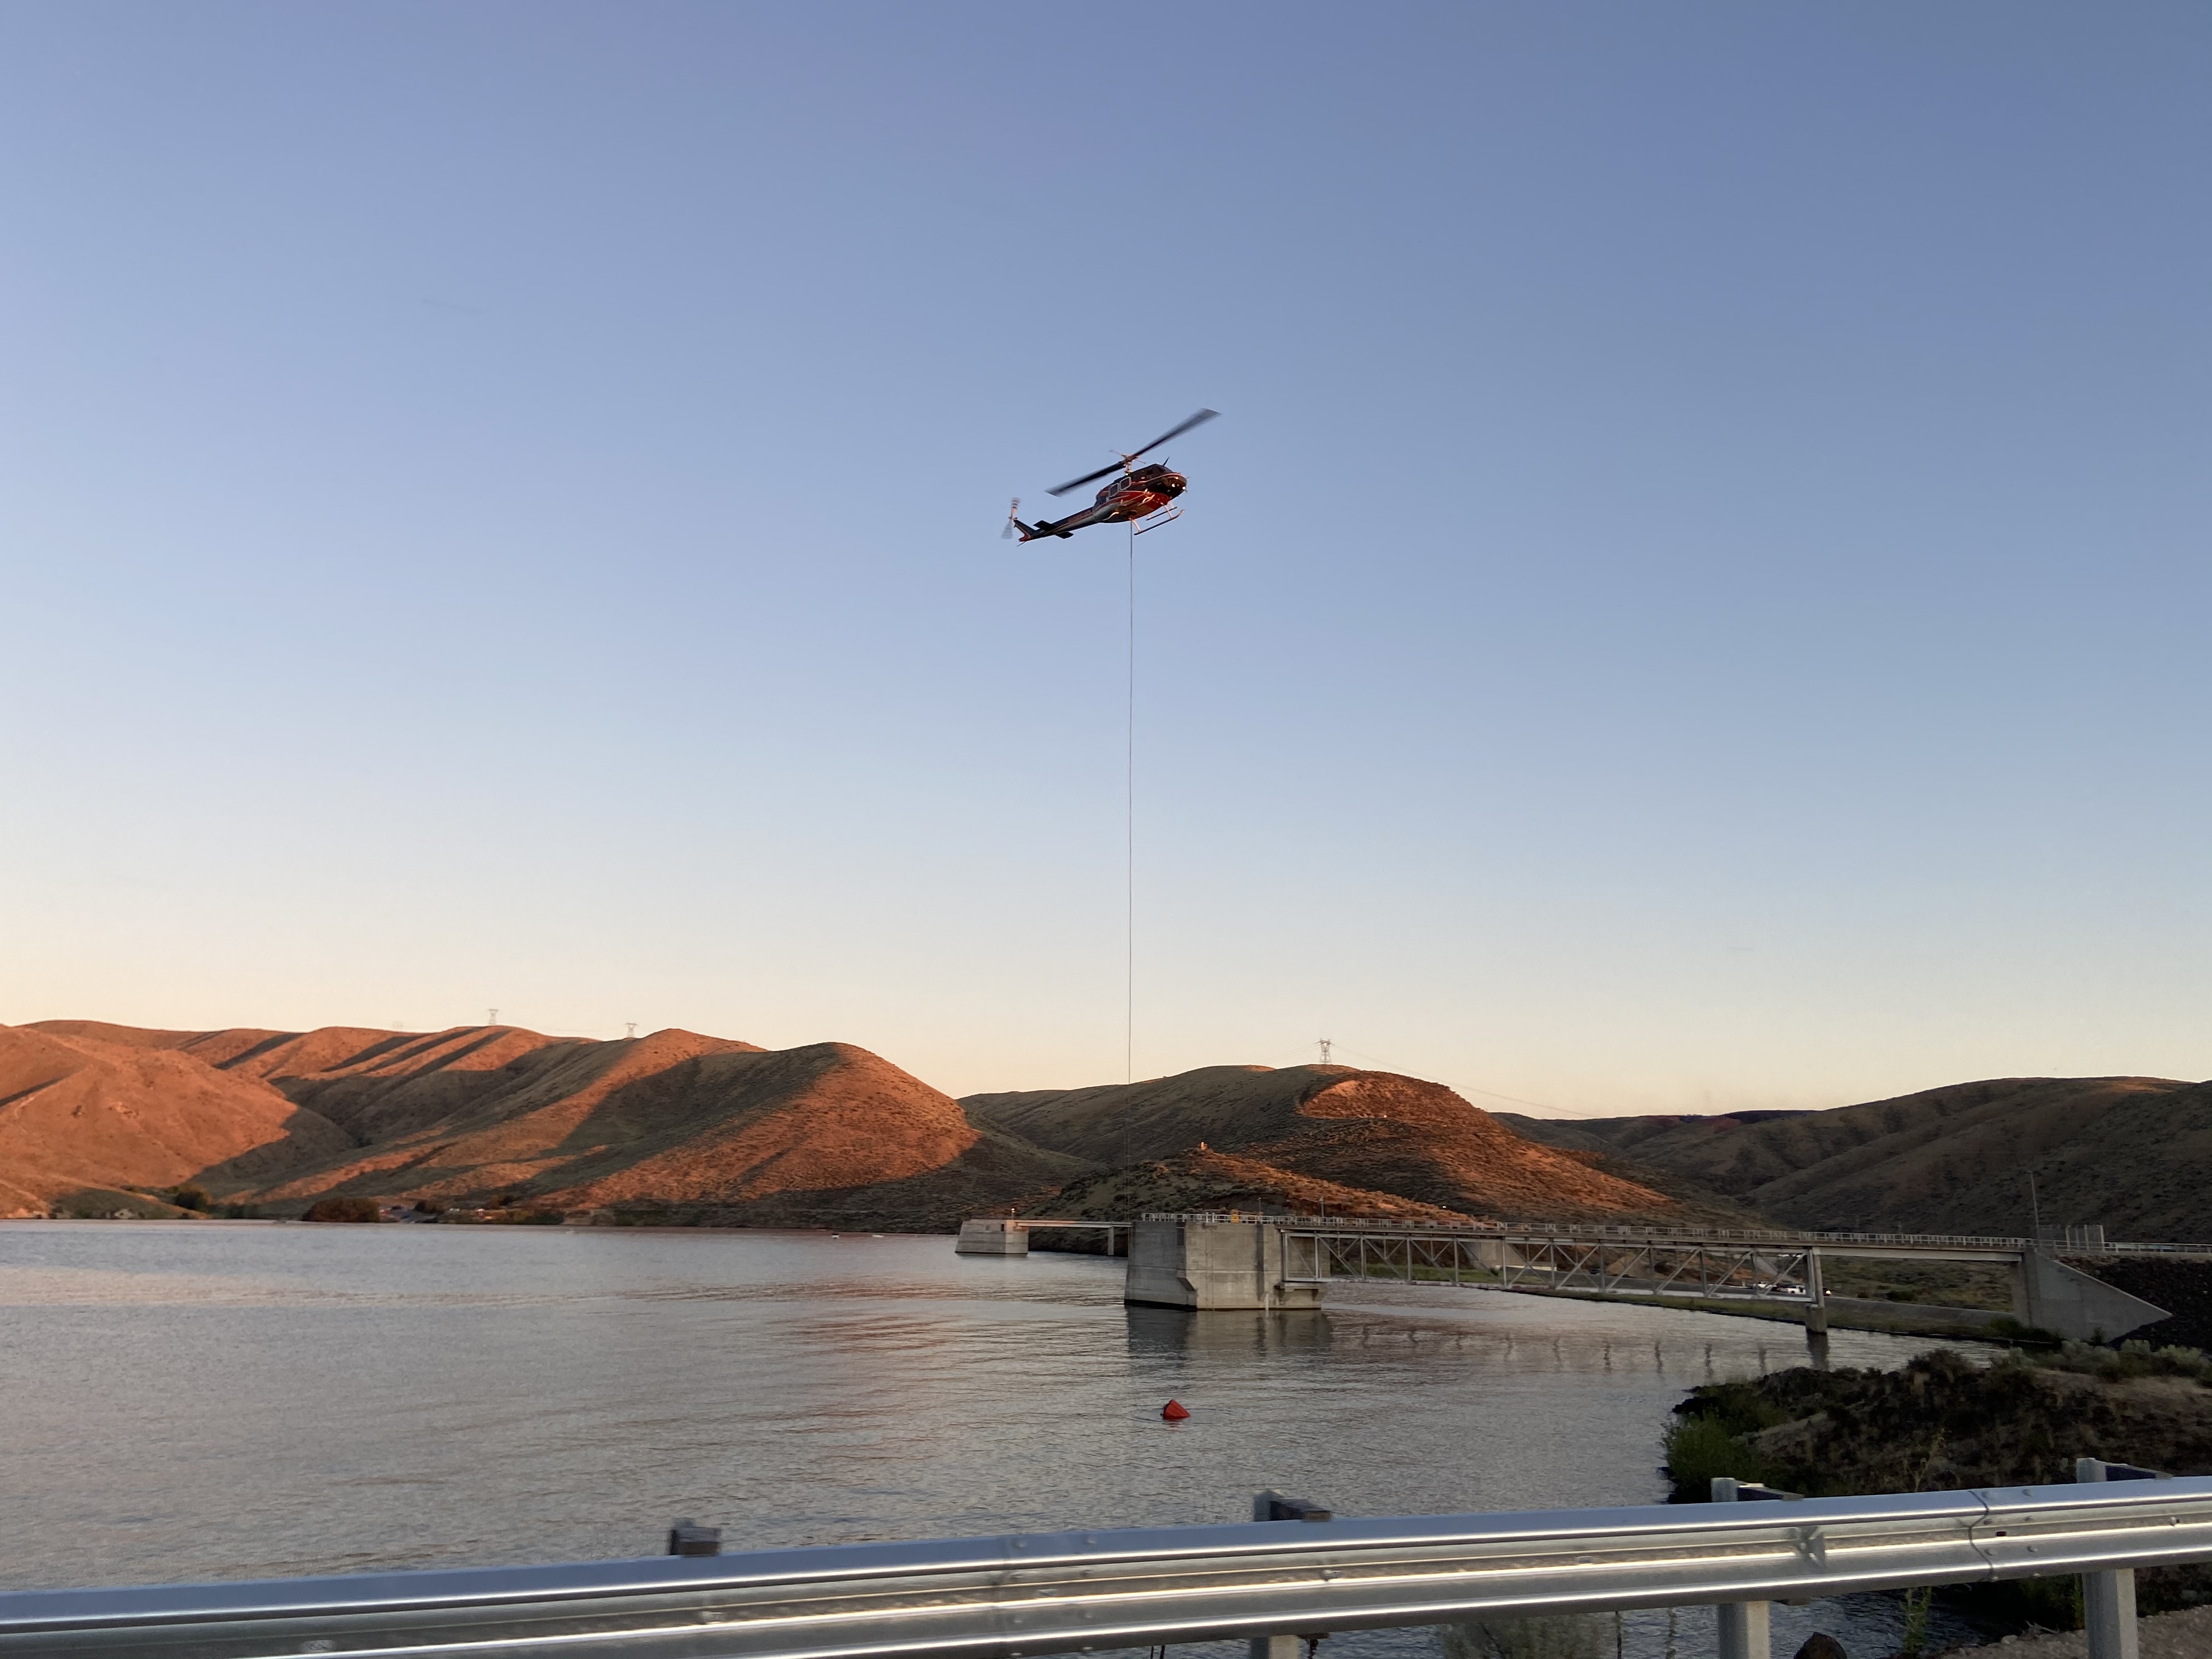 Helicopter dipping out of Lucky Peak Reservoir